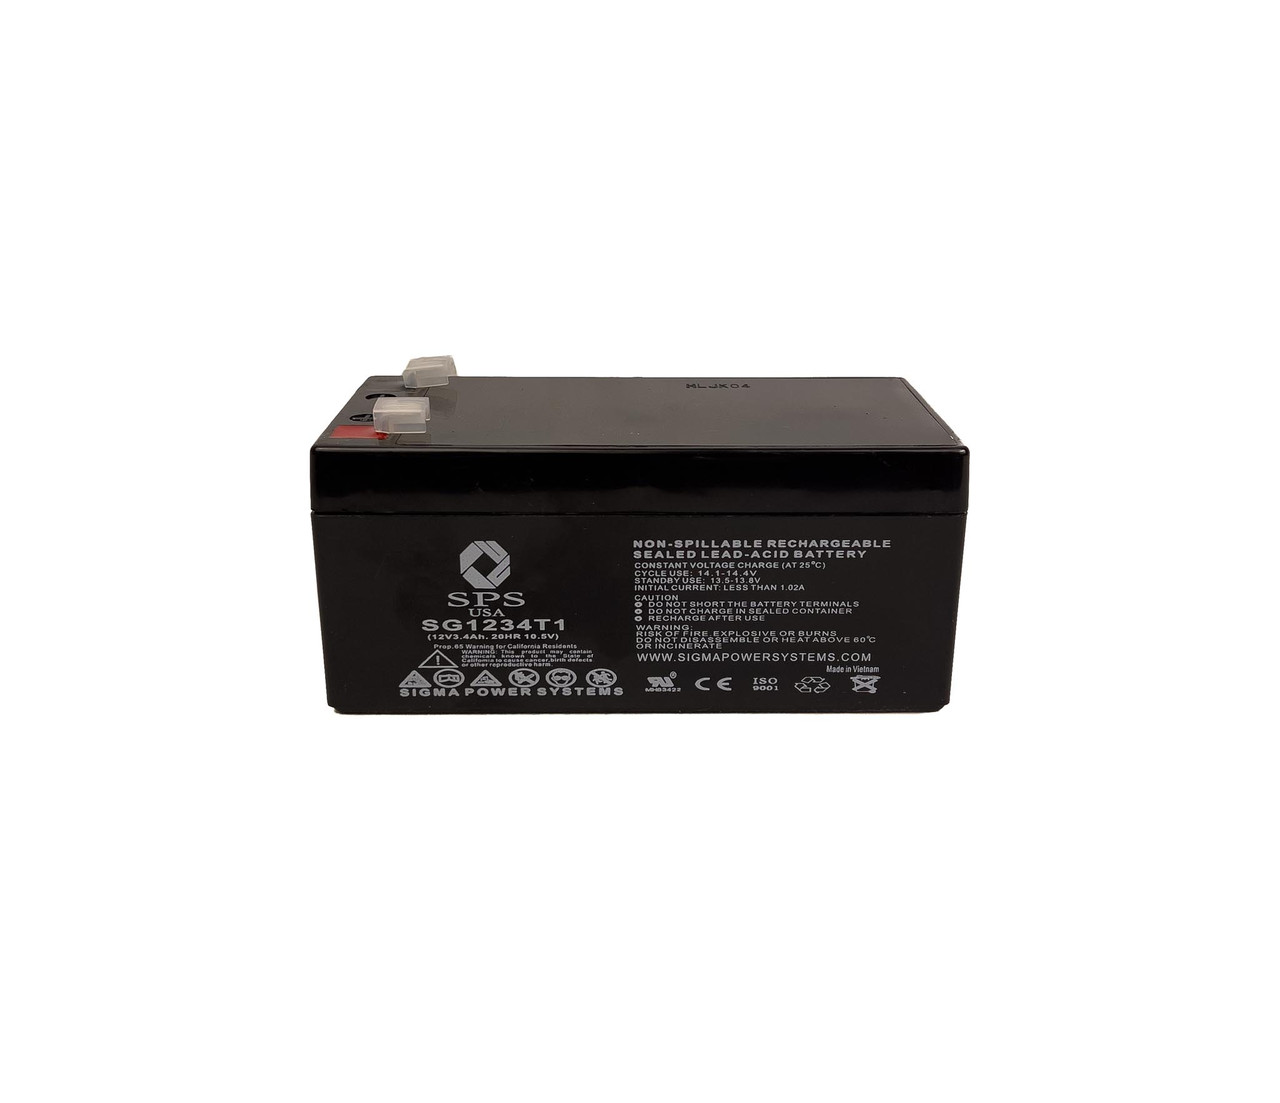 Raion Power RG1234T1 Rechargeable Compatible Replacement Battery for Black & Decker CST1000 Type 1 Cordless String Trimmer